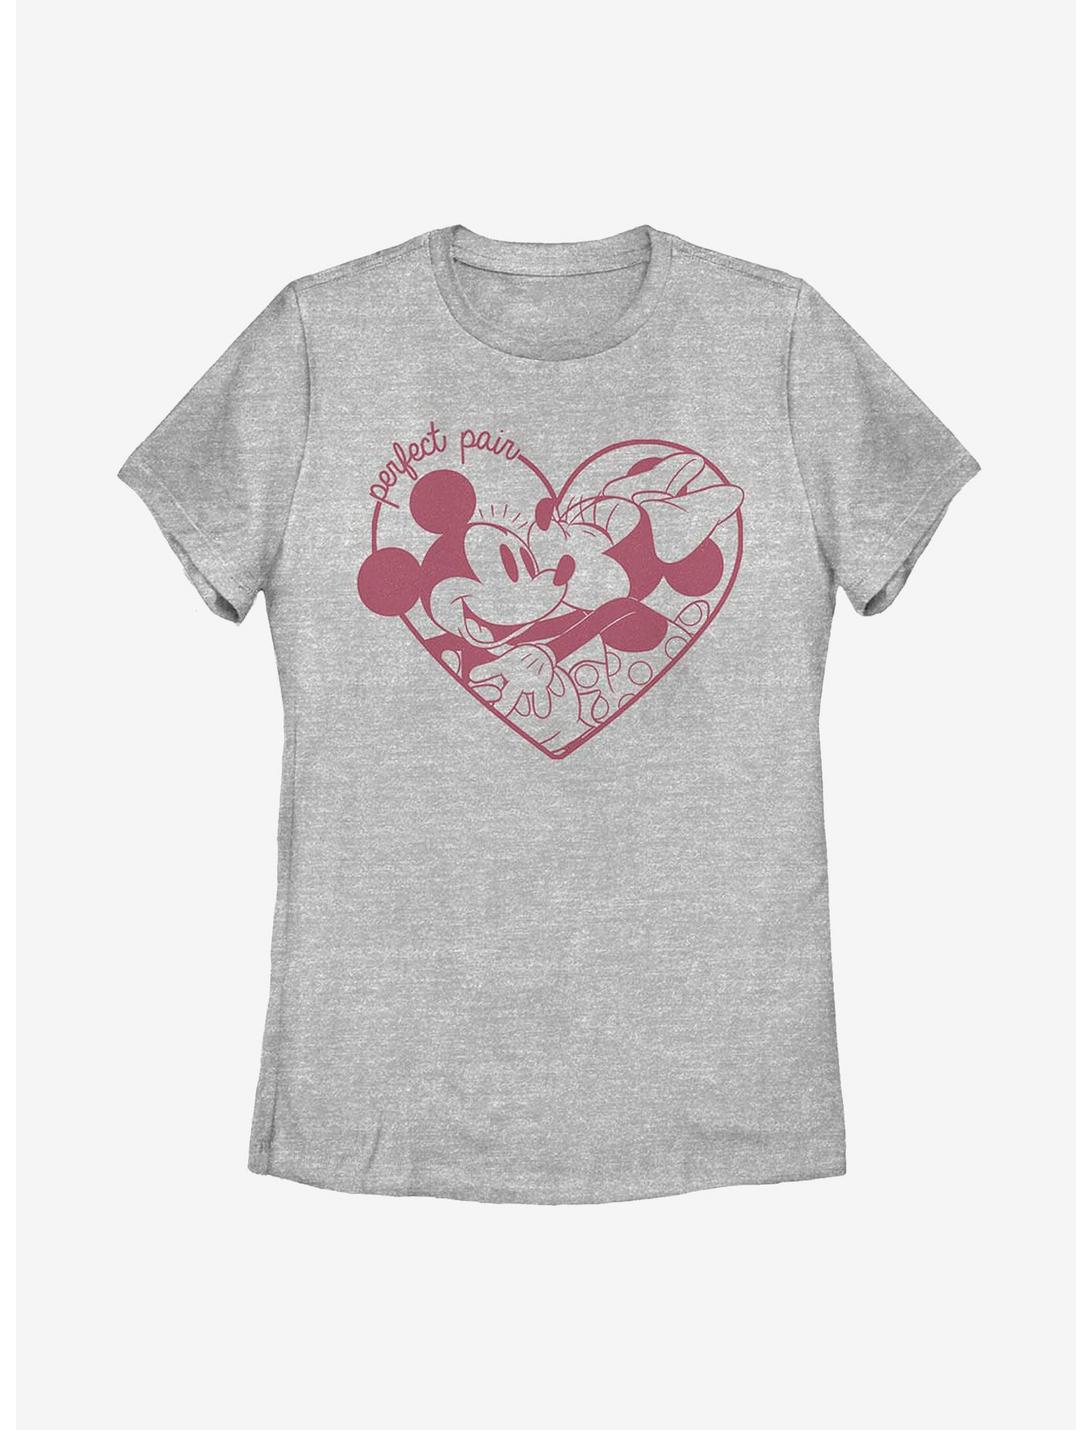 Disney Mickey Mouse Perfect Pair Womens T-Shirt, ATH HTR, hi-res